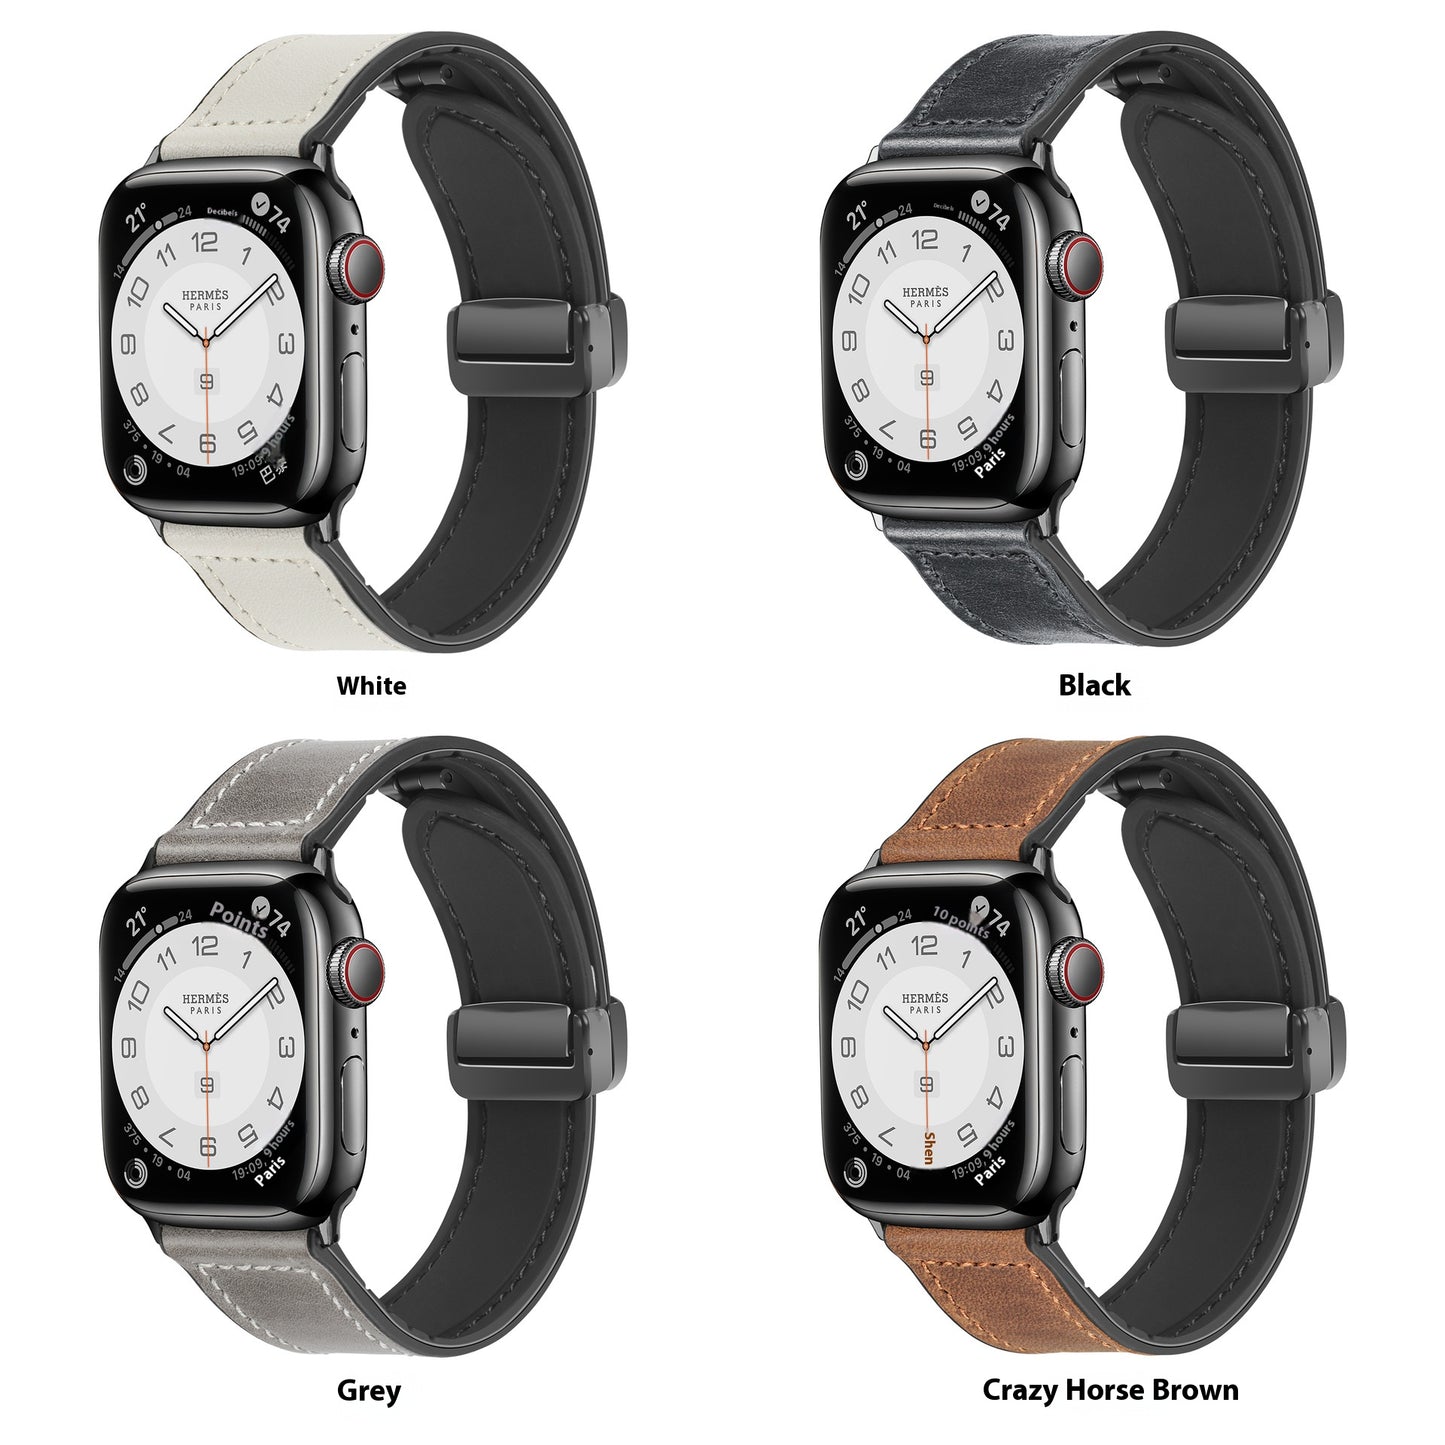 Suitable for Apple watches with silicone skin, magnetic suction, foldable buckle, and genuine leather strap